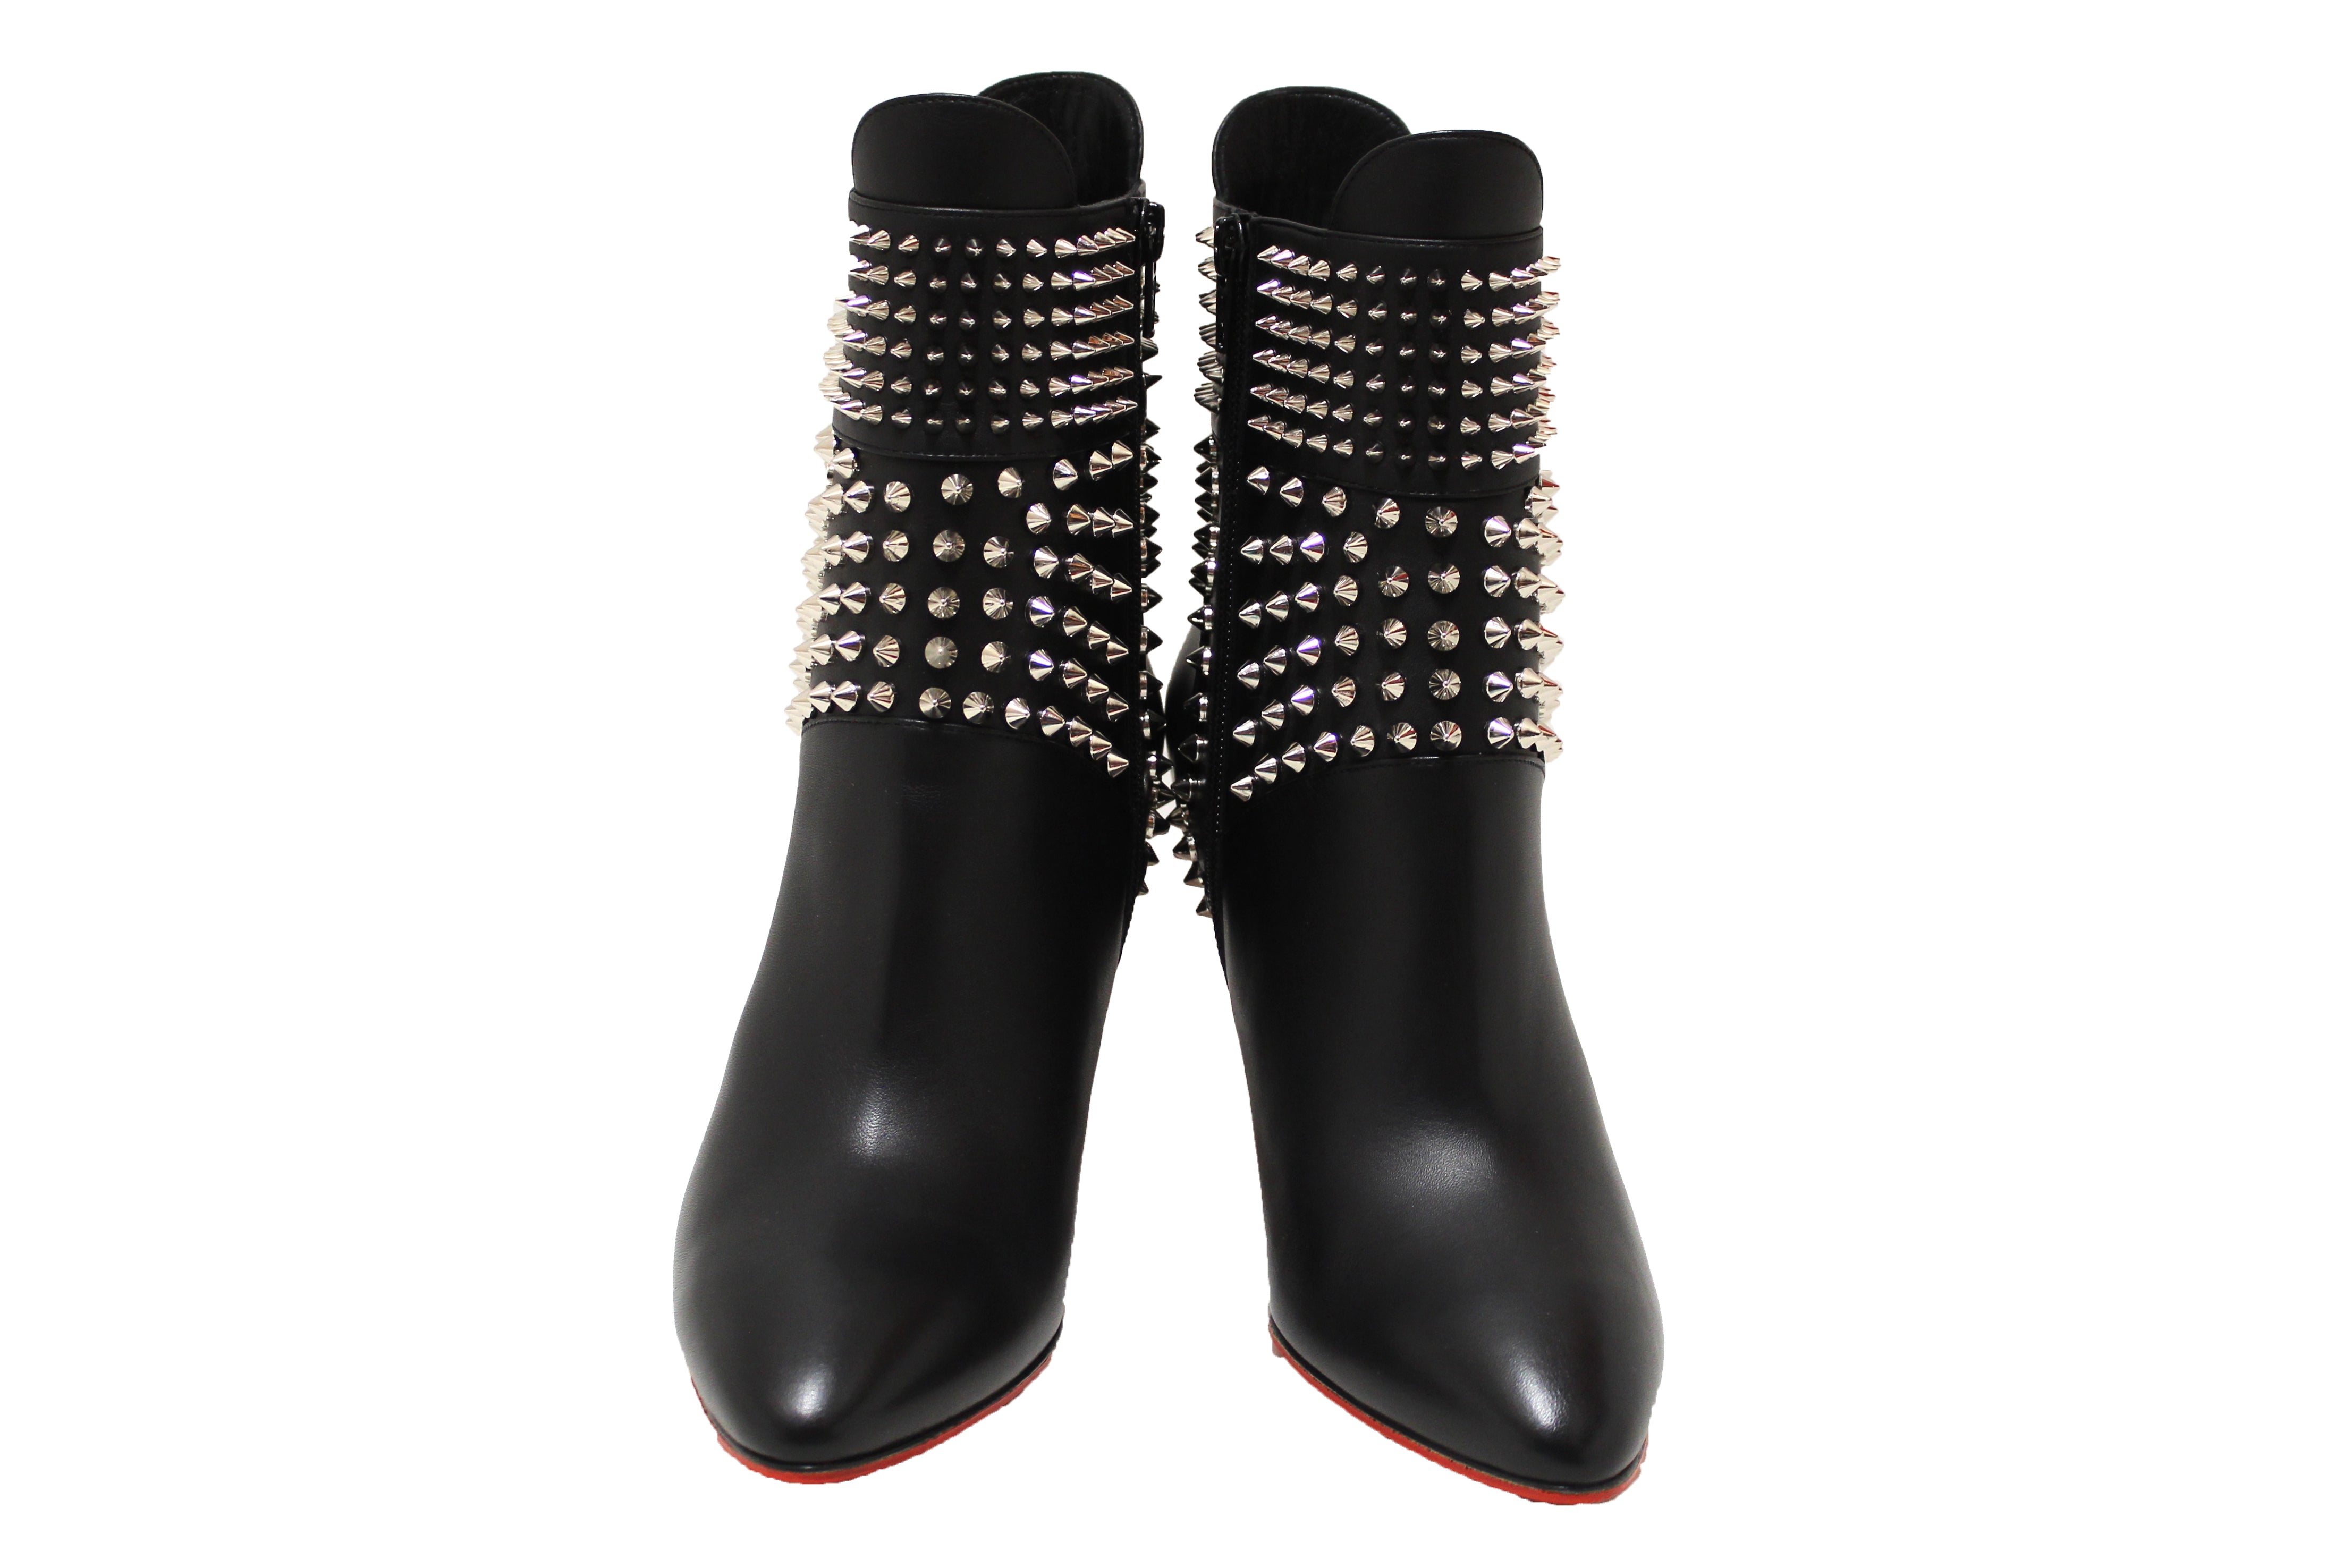 louboutin boots studded